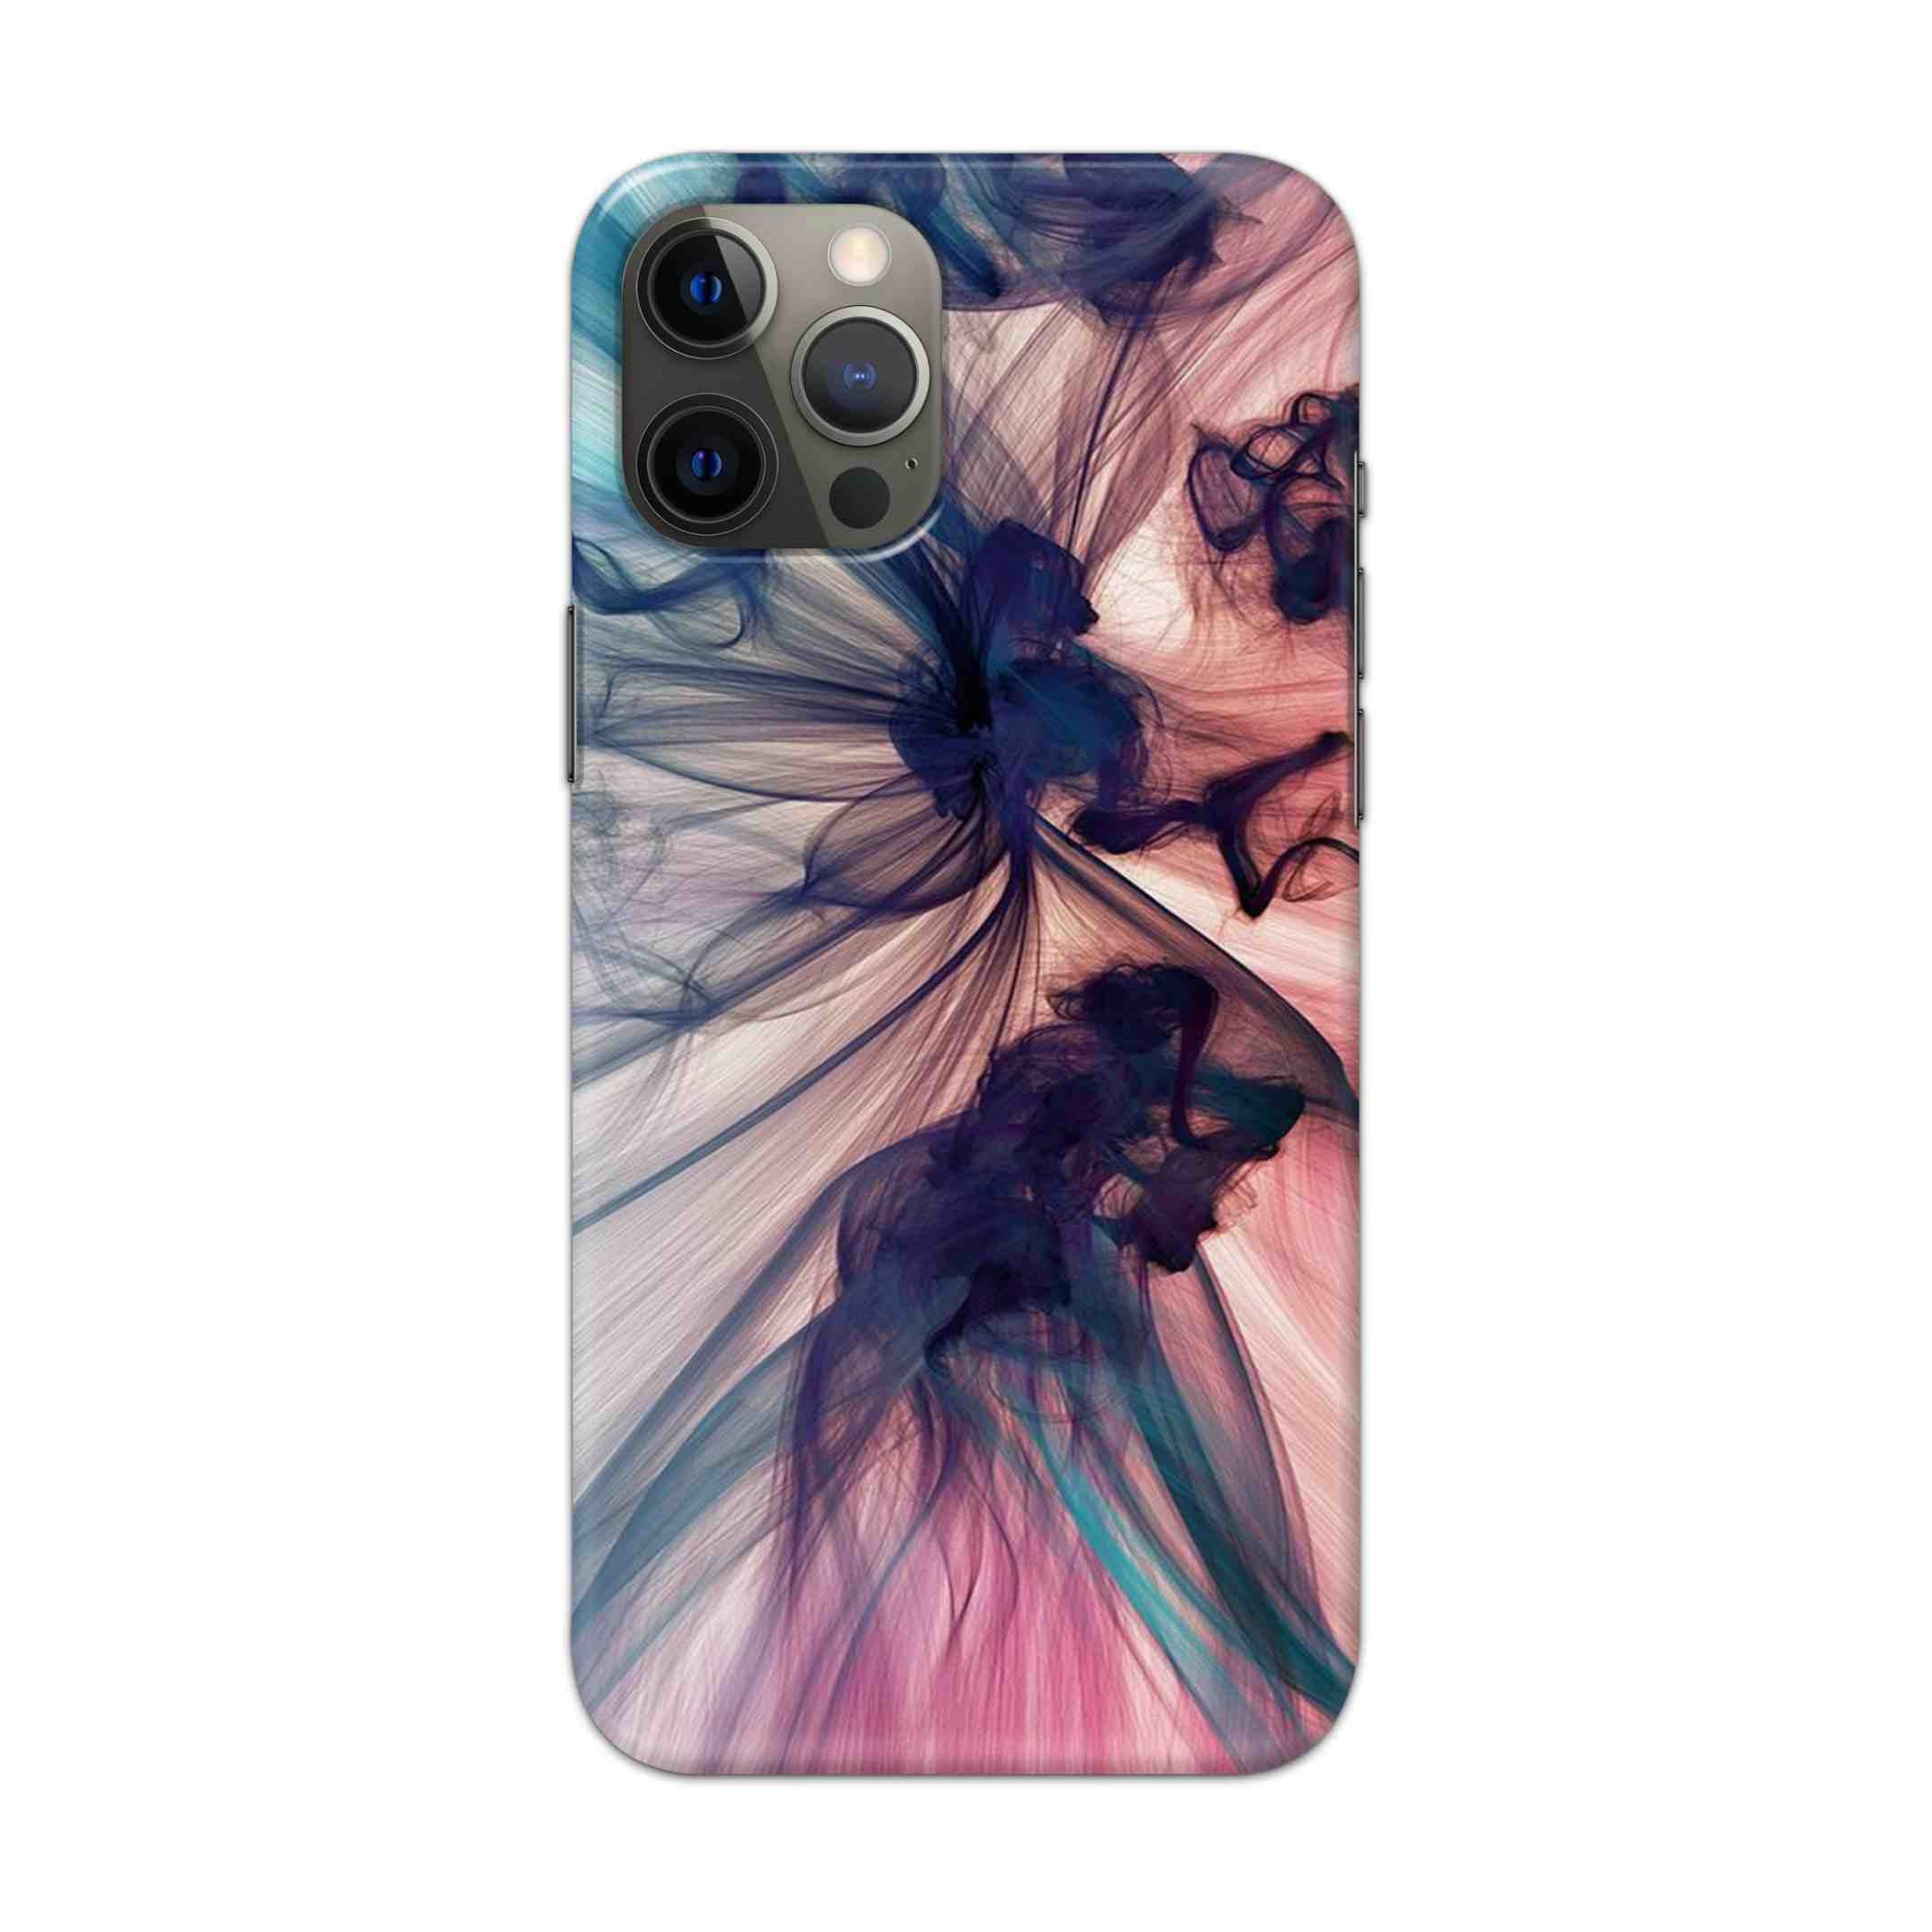 Buy Colourful Texture Hard Back Mobile Phone Case Cover For Apple iPhone 13 Pro Max Online